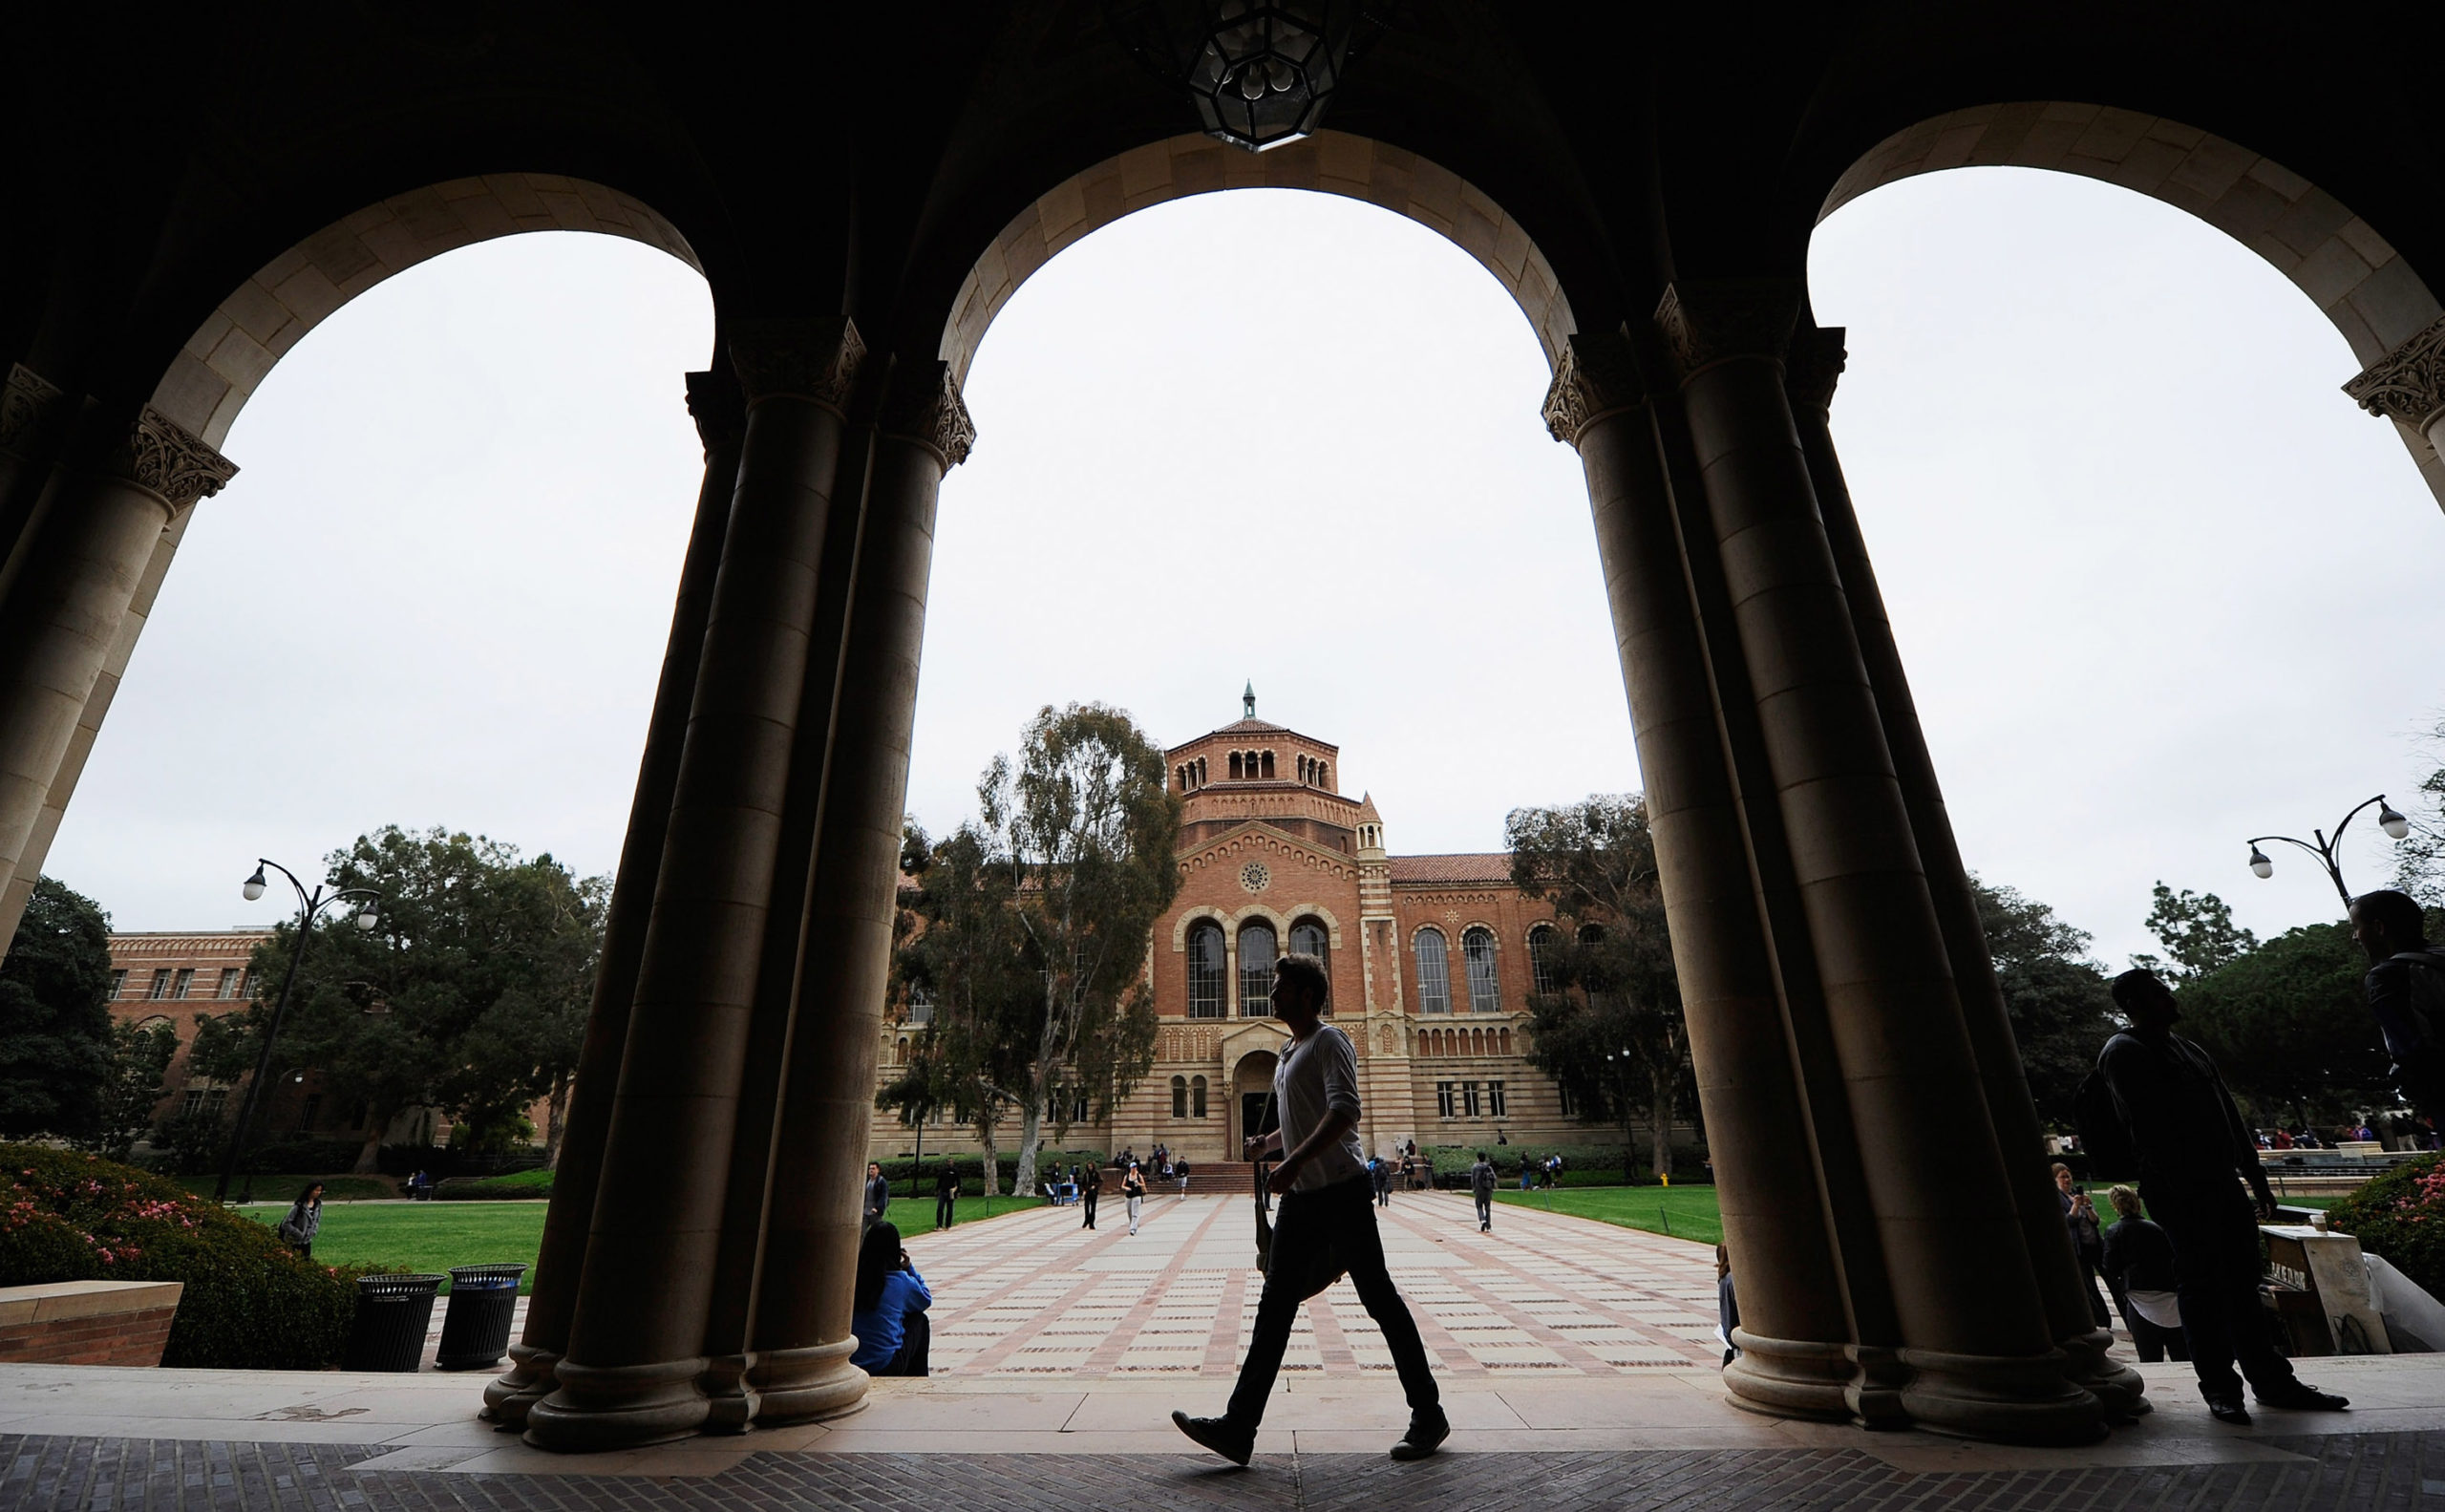 A student walks near Royce Hall on the UCLA campus on April 23, 2012 in Los Angeles, California.  Half of recent college graduates with bachelor's degrees are reportedly underemployed or out of work.  (Photo by Kevork Djansezian/Getty Images)